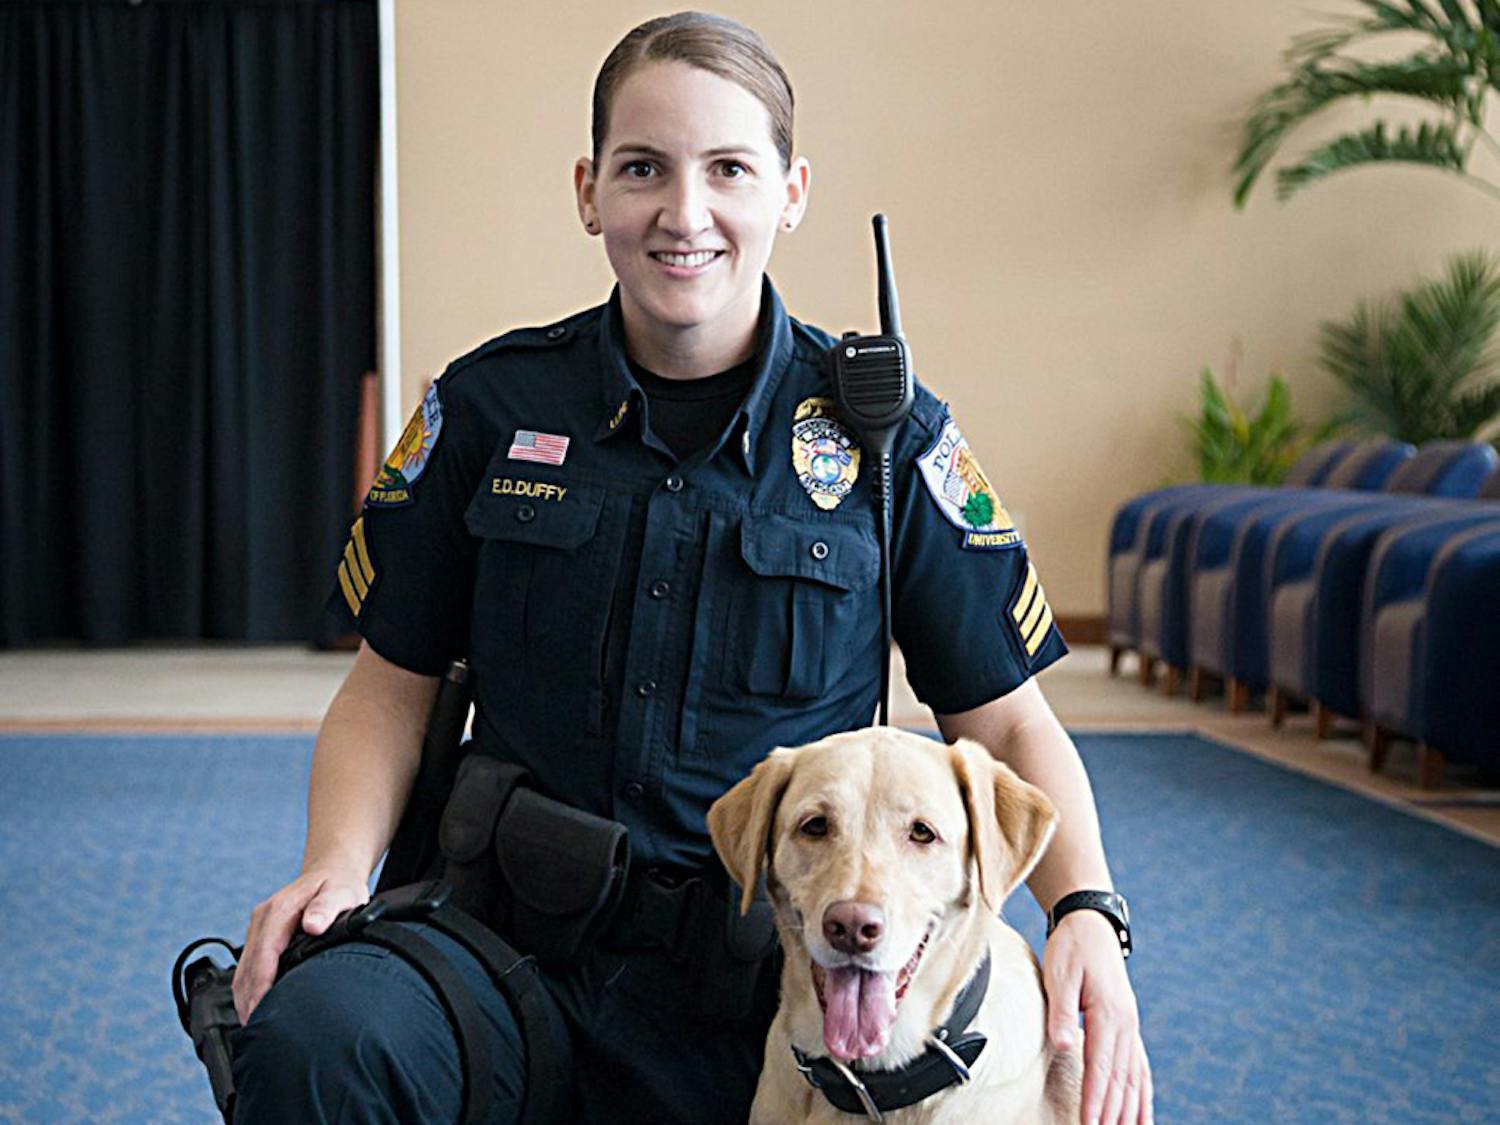 Sergeant Ellen Duffy poses with her 4-year-old lab, Amber, one of the dogs expected to receive a free exam during the American College of Veterinary Ophthalmologists’ National Service Dog Eye Exam event at the UF Small Animal Hospital.